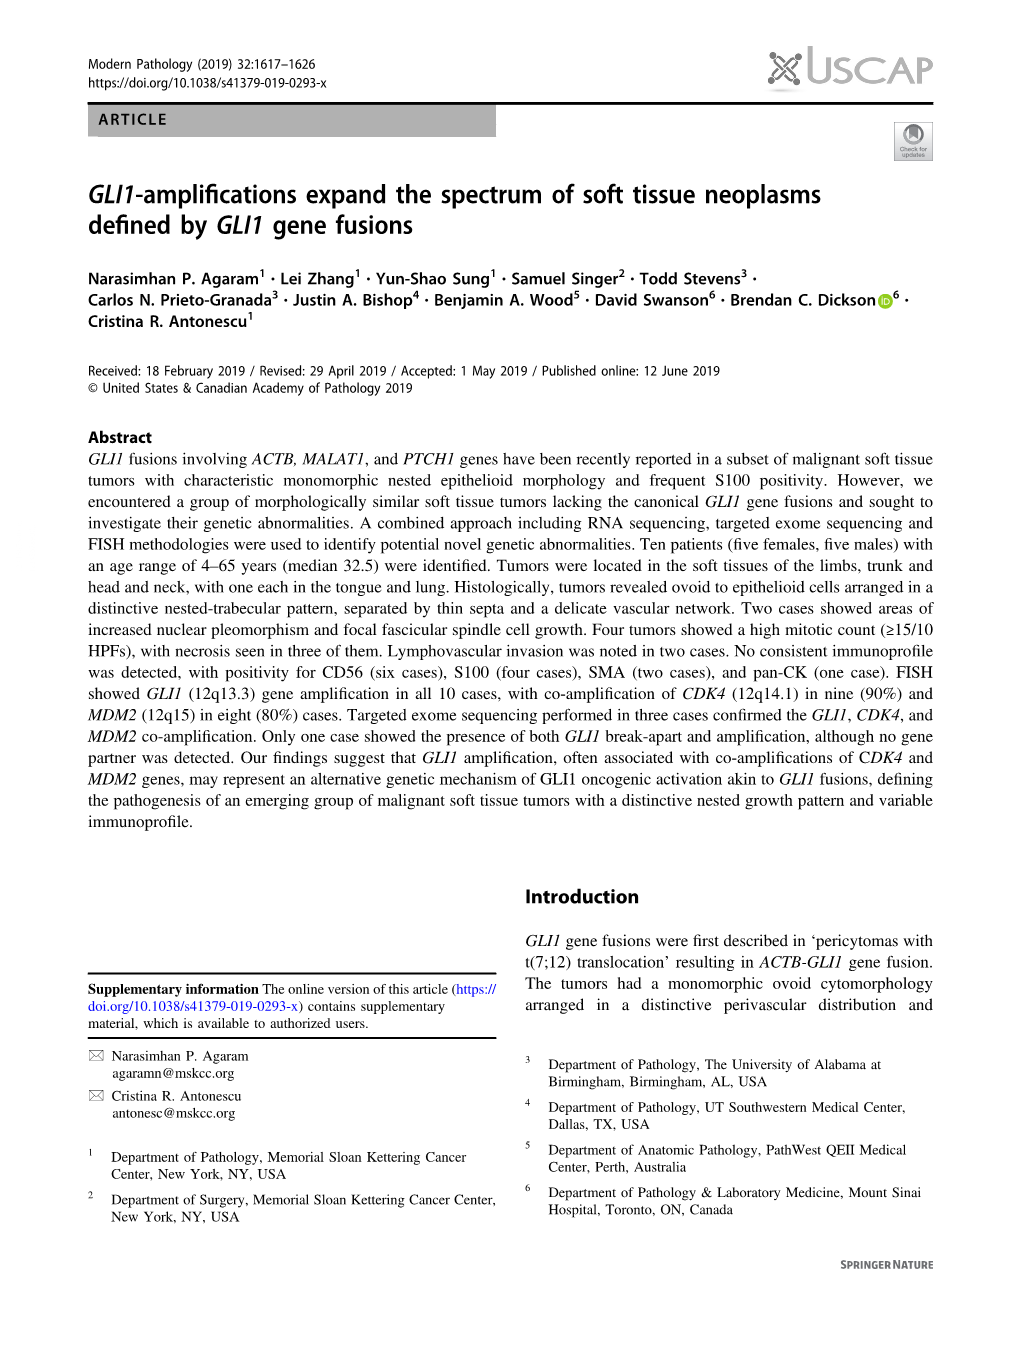 GLI1-Ampliﬁcations Expand the Spectrum of Soft Tissue Neoplasms Deﬁned by GLI1 Gene Fusions